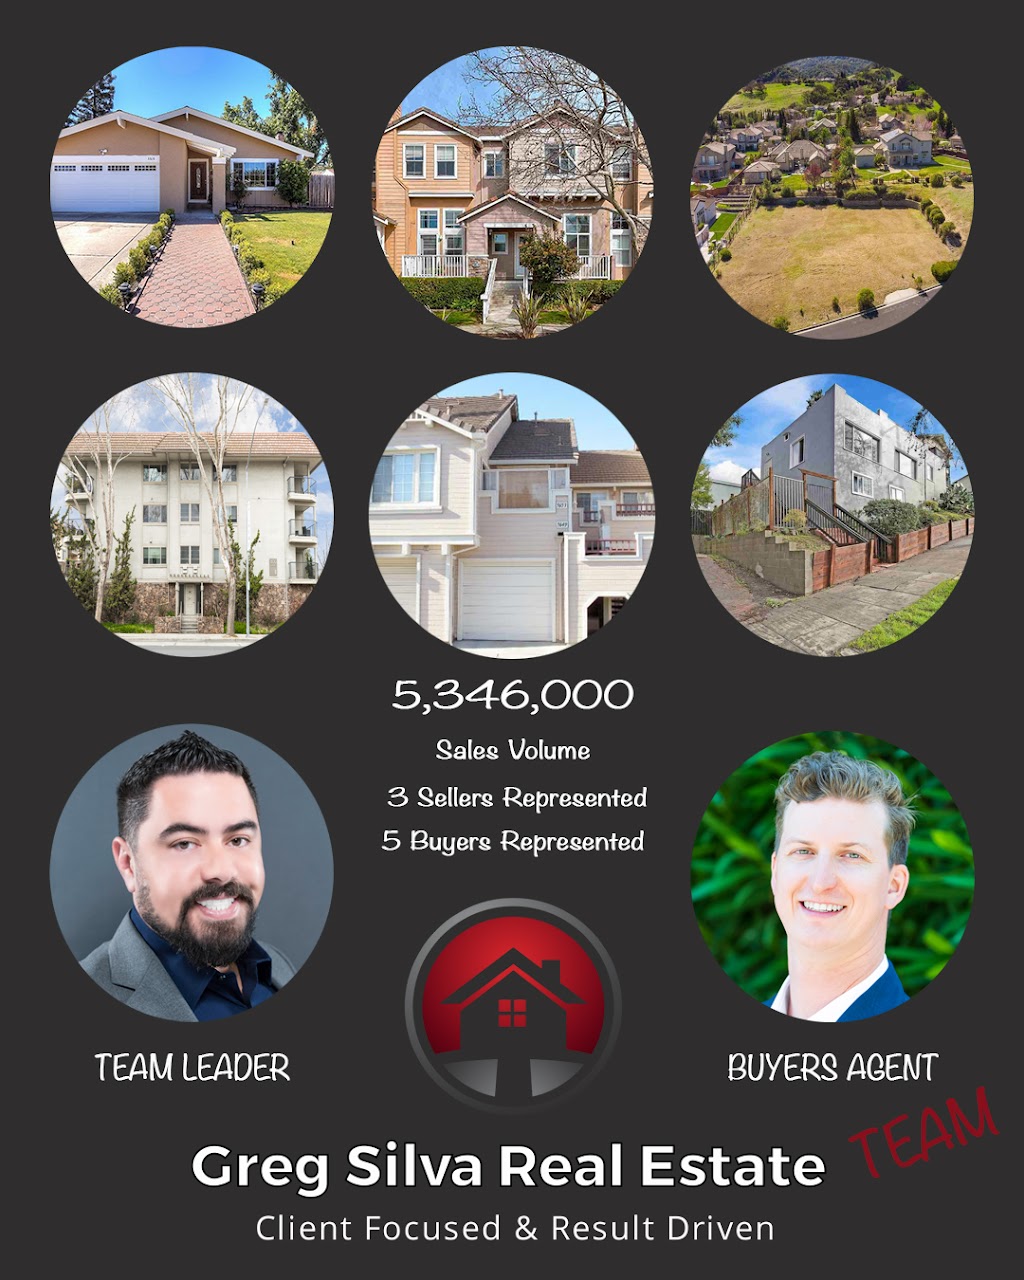 Greg Silva Real Estate Group | 601 Sycamore Valley Rd W, Danville, CA 94526, USA | Phone: (925) 786-8887